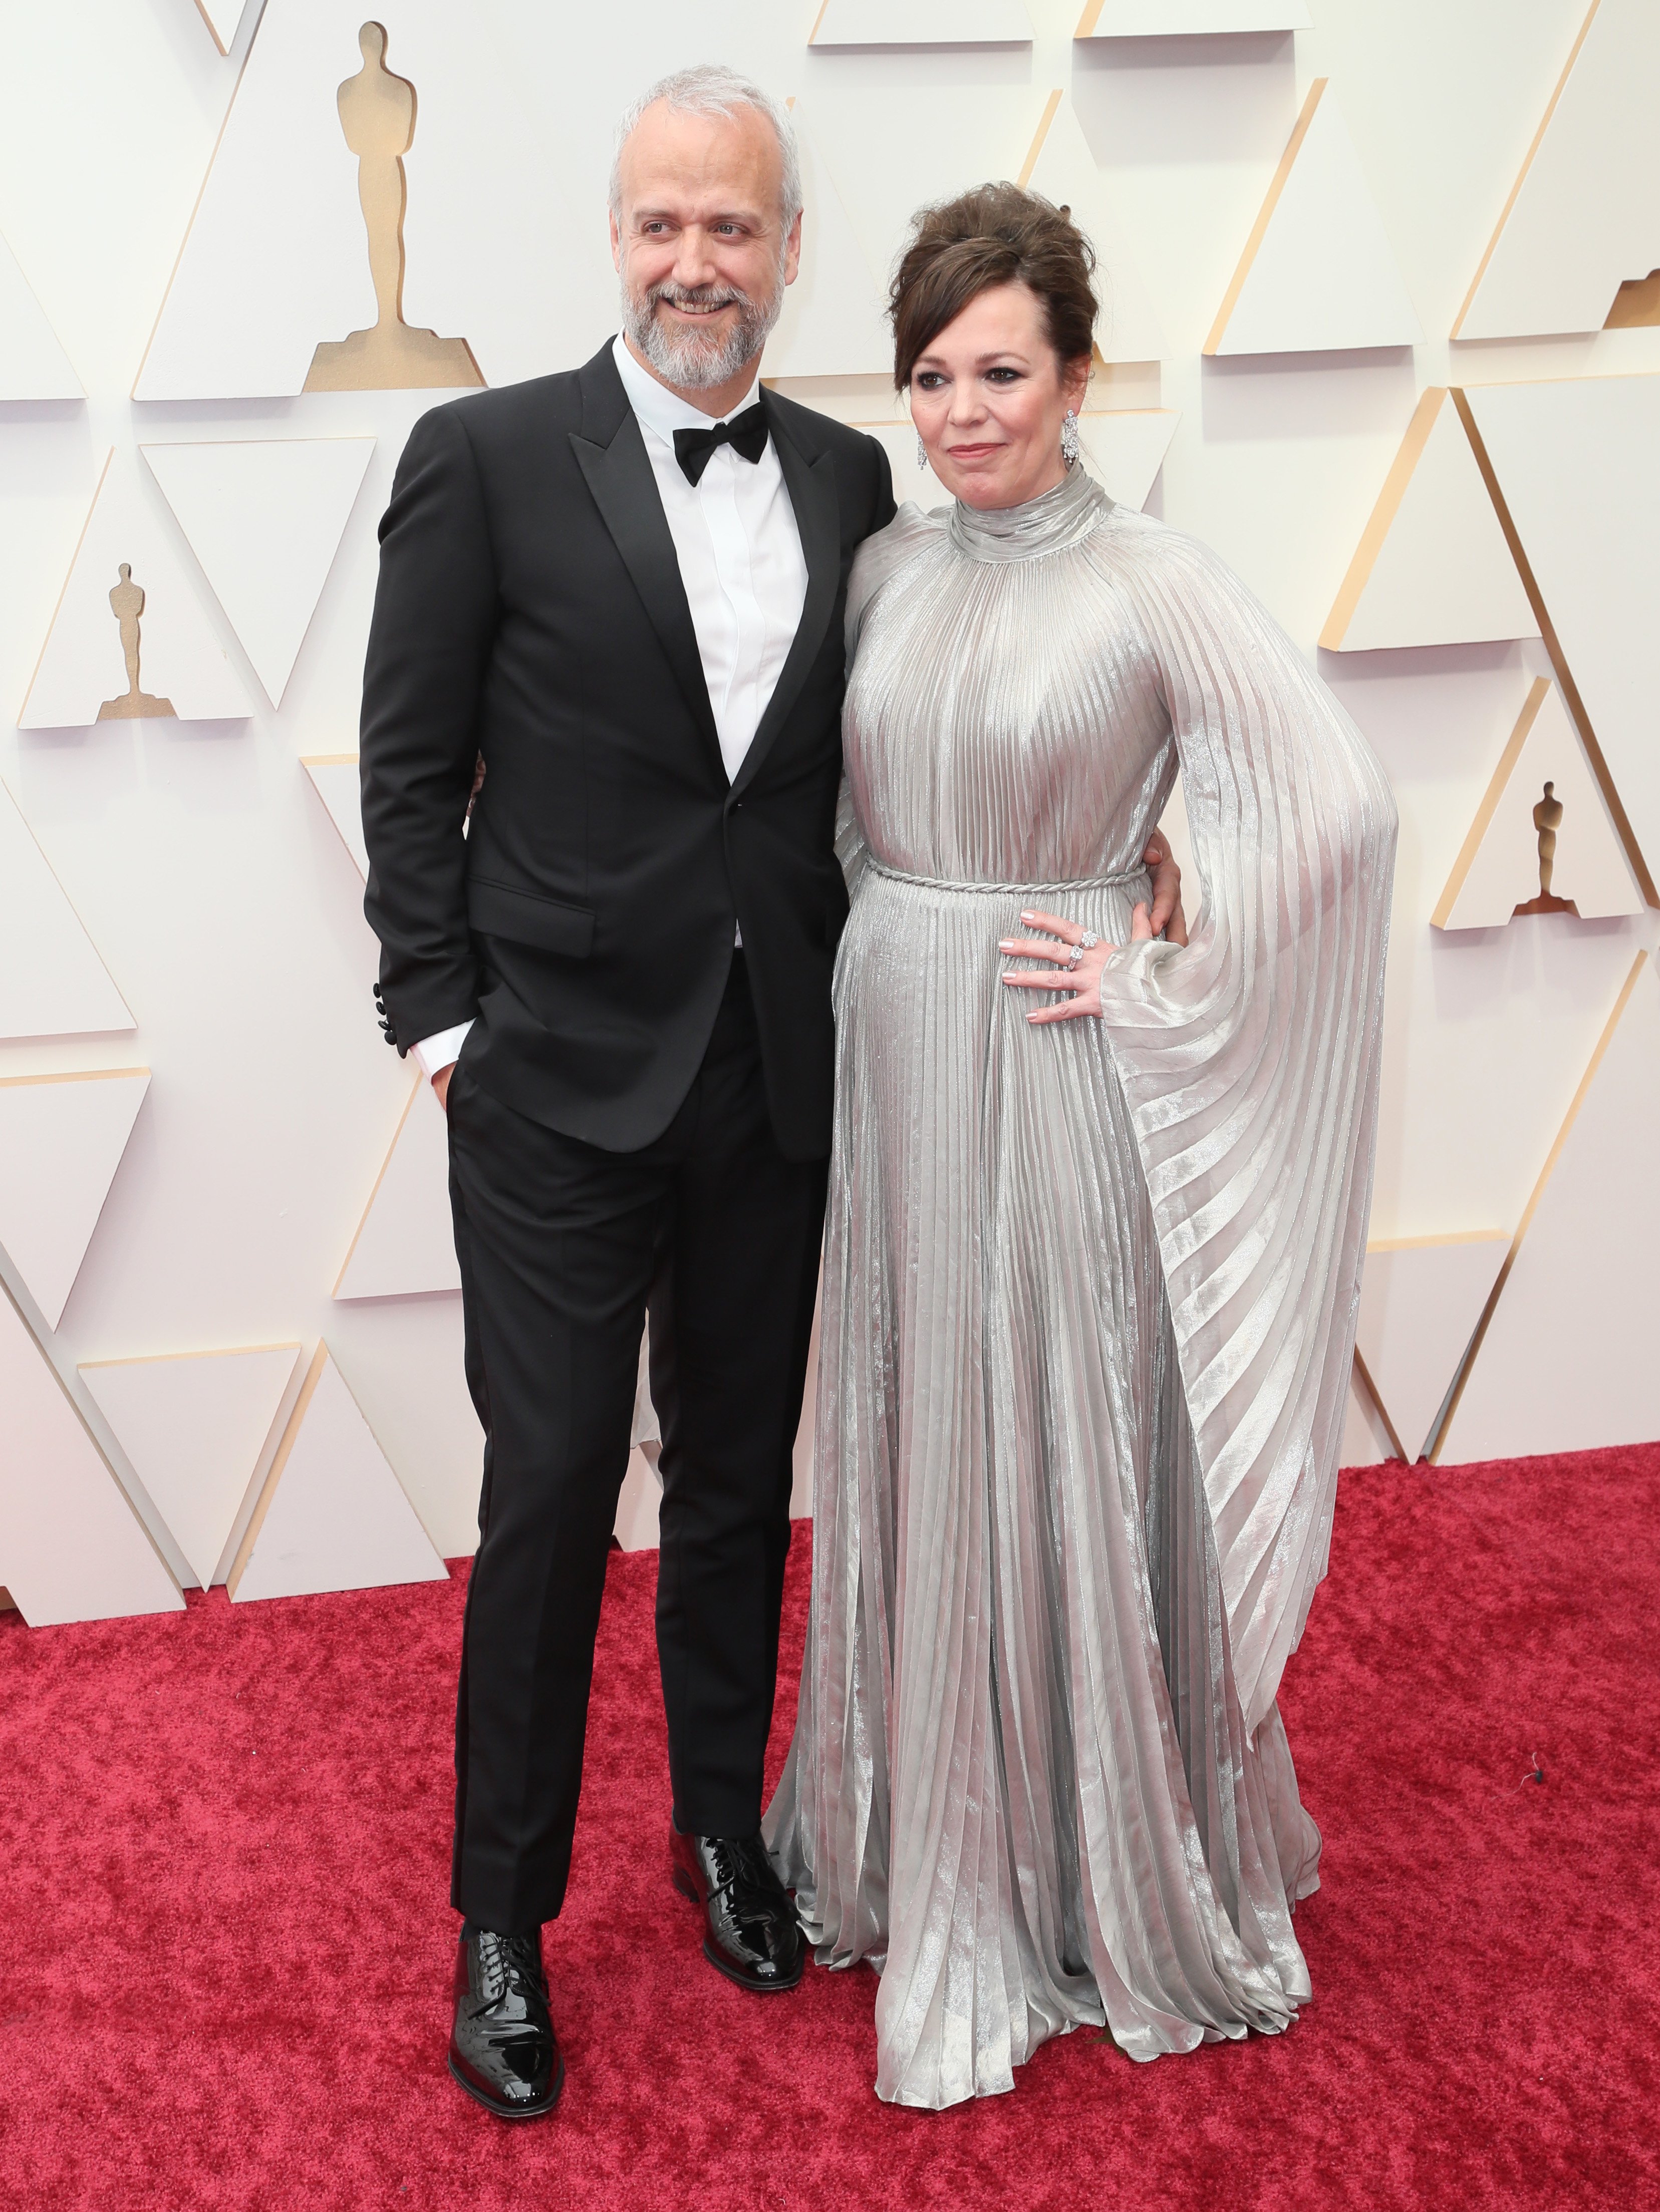 Ed Sinclair and his wife Olivia Colman at the 9th Annual Academy Awards in California on March 27, 2022 | Source: Getty Images 